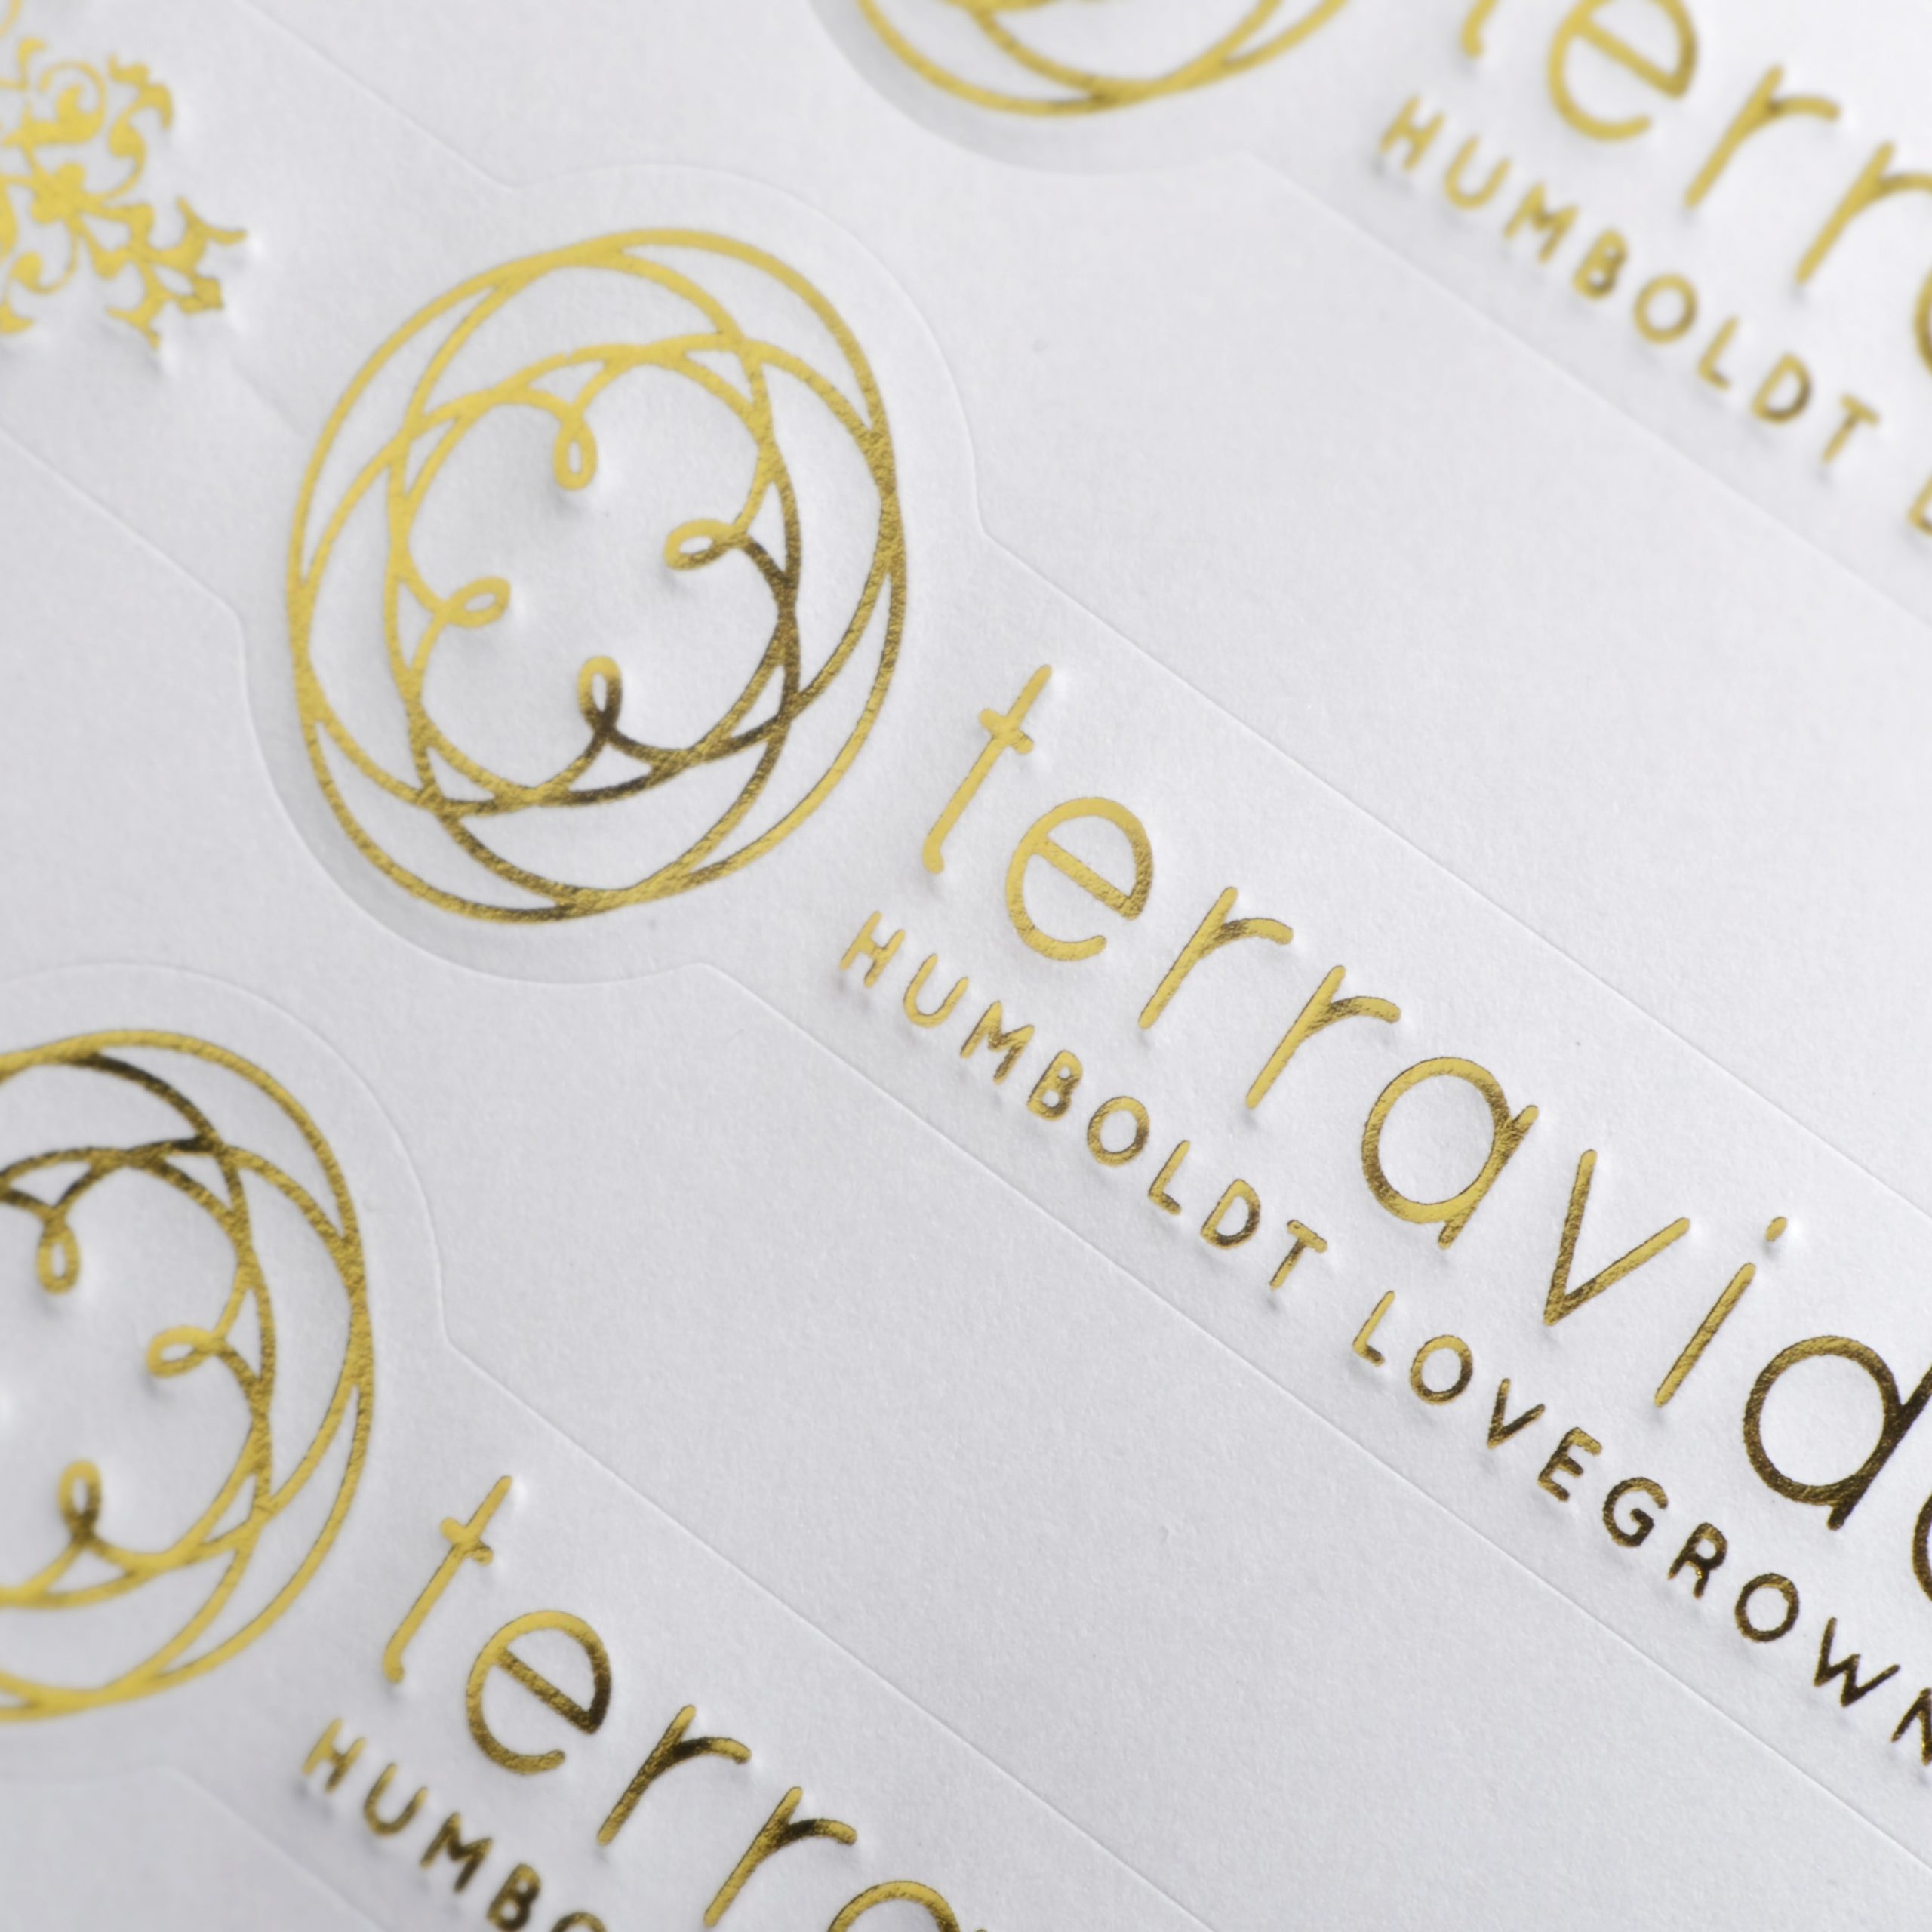 Custom Embossed Labels - Free Shipping & Proofing - Inkable Label Co.